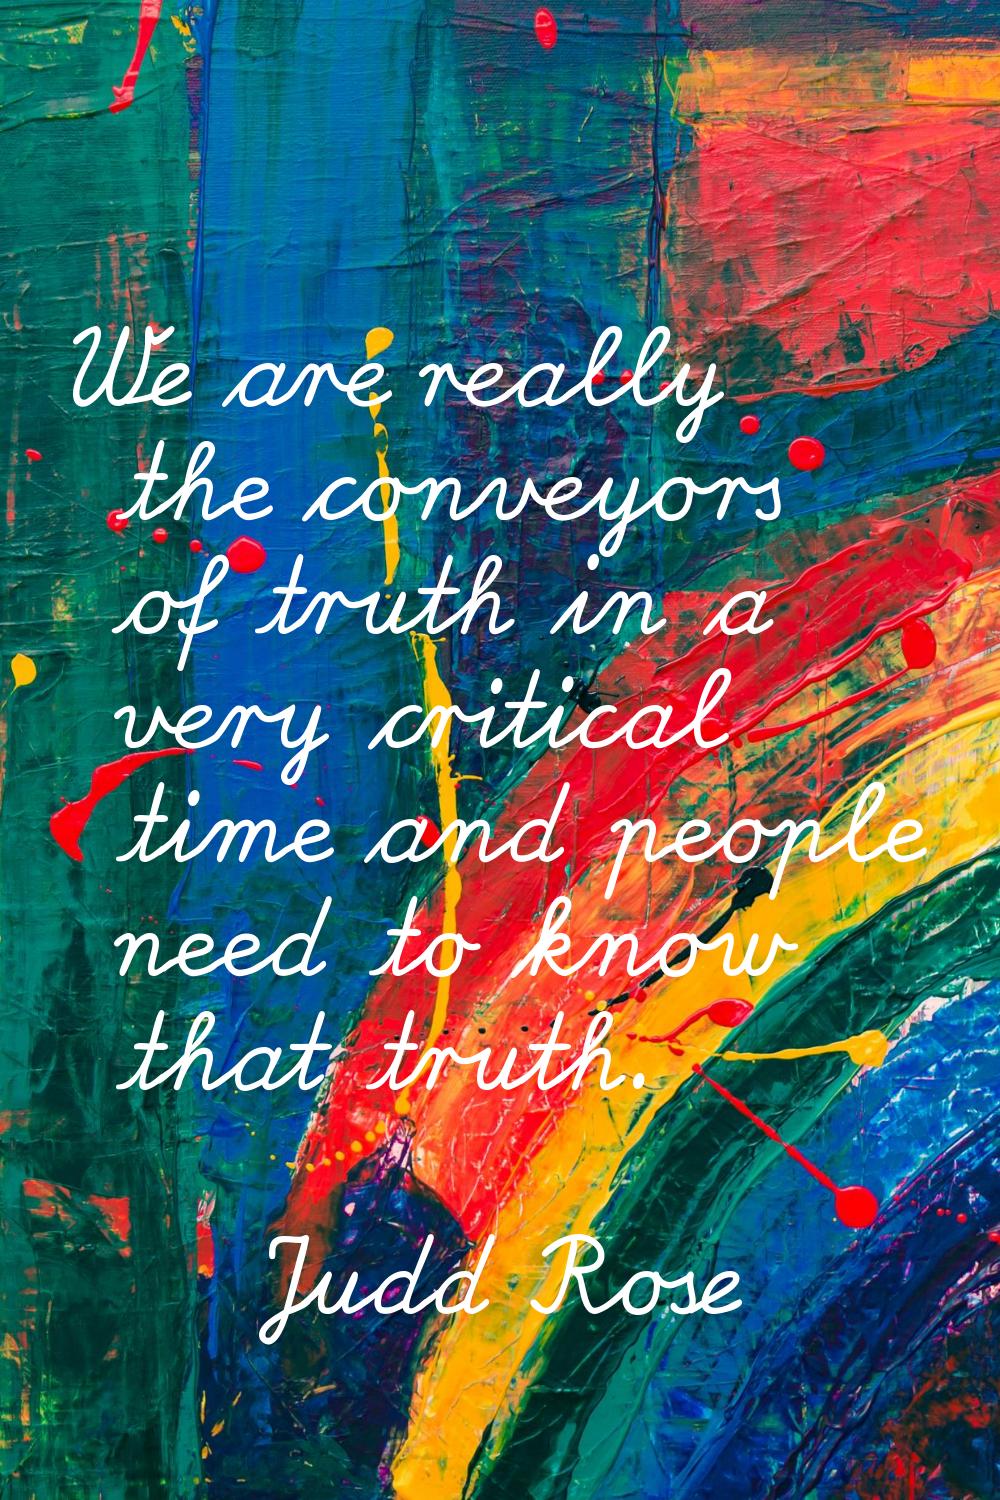 We are really the conveyors of truth in a very critical time and people need to know that truth.